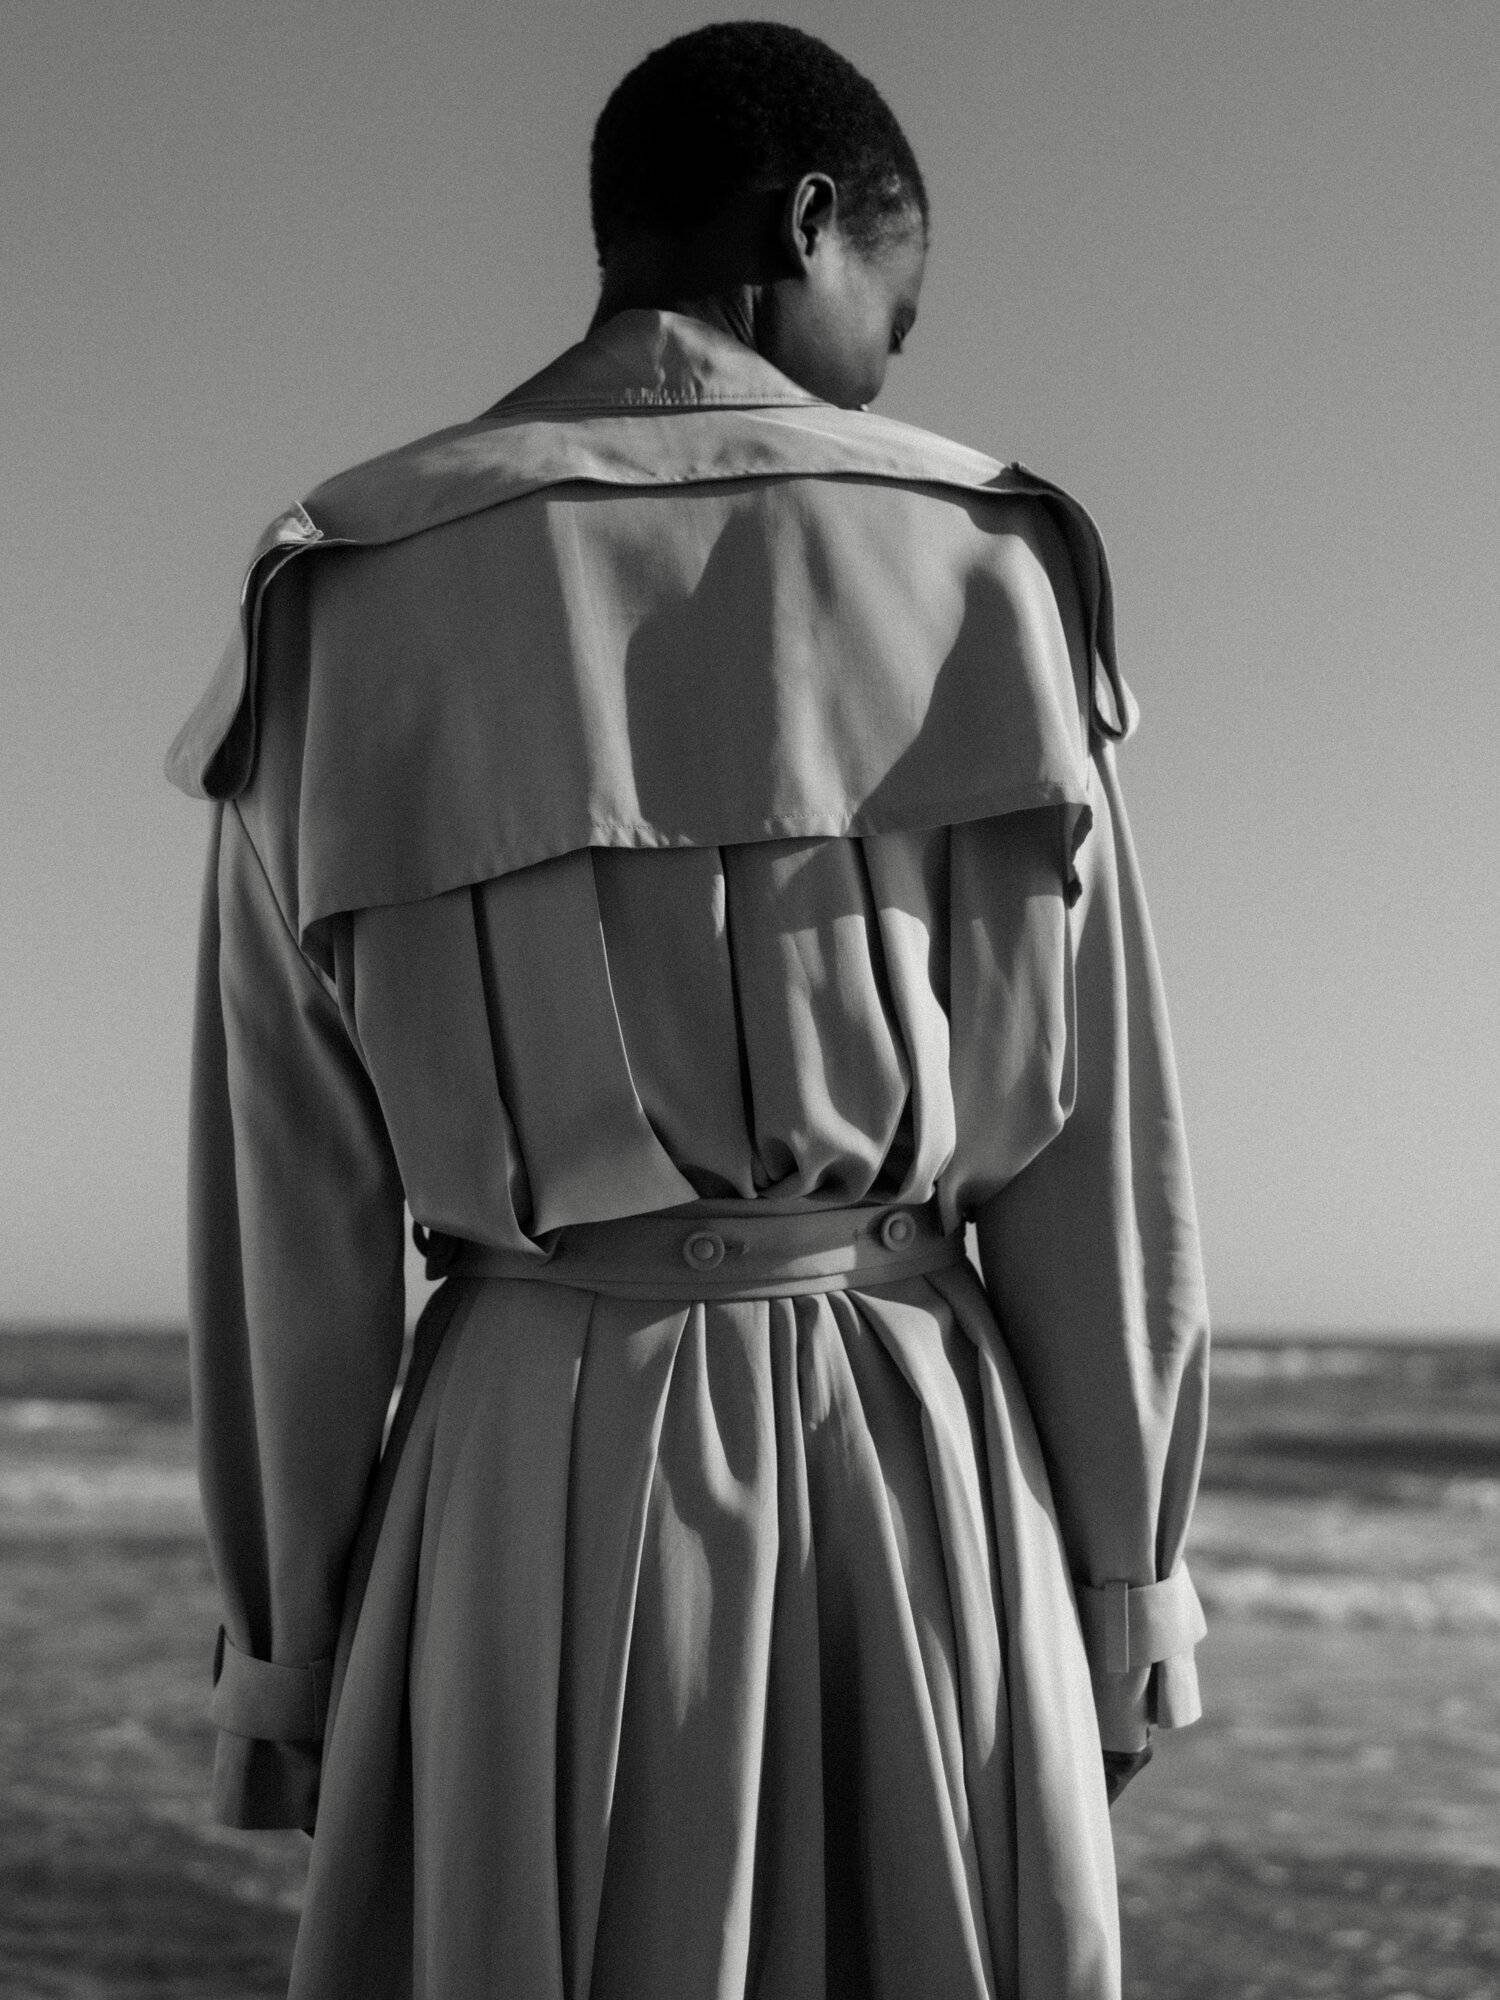  Clothing: Trench Dress by Ports 1961. Stylist: Giulia Querenghi. Beauty Artist: Emilie Green. Location: Camargue, France 